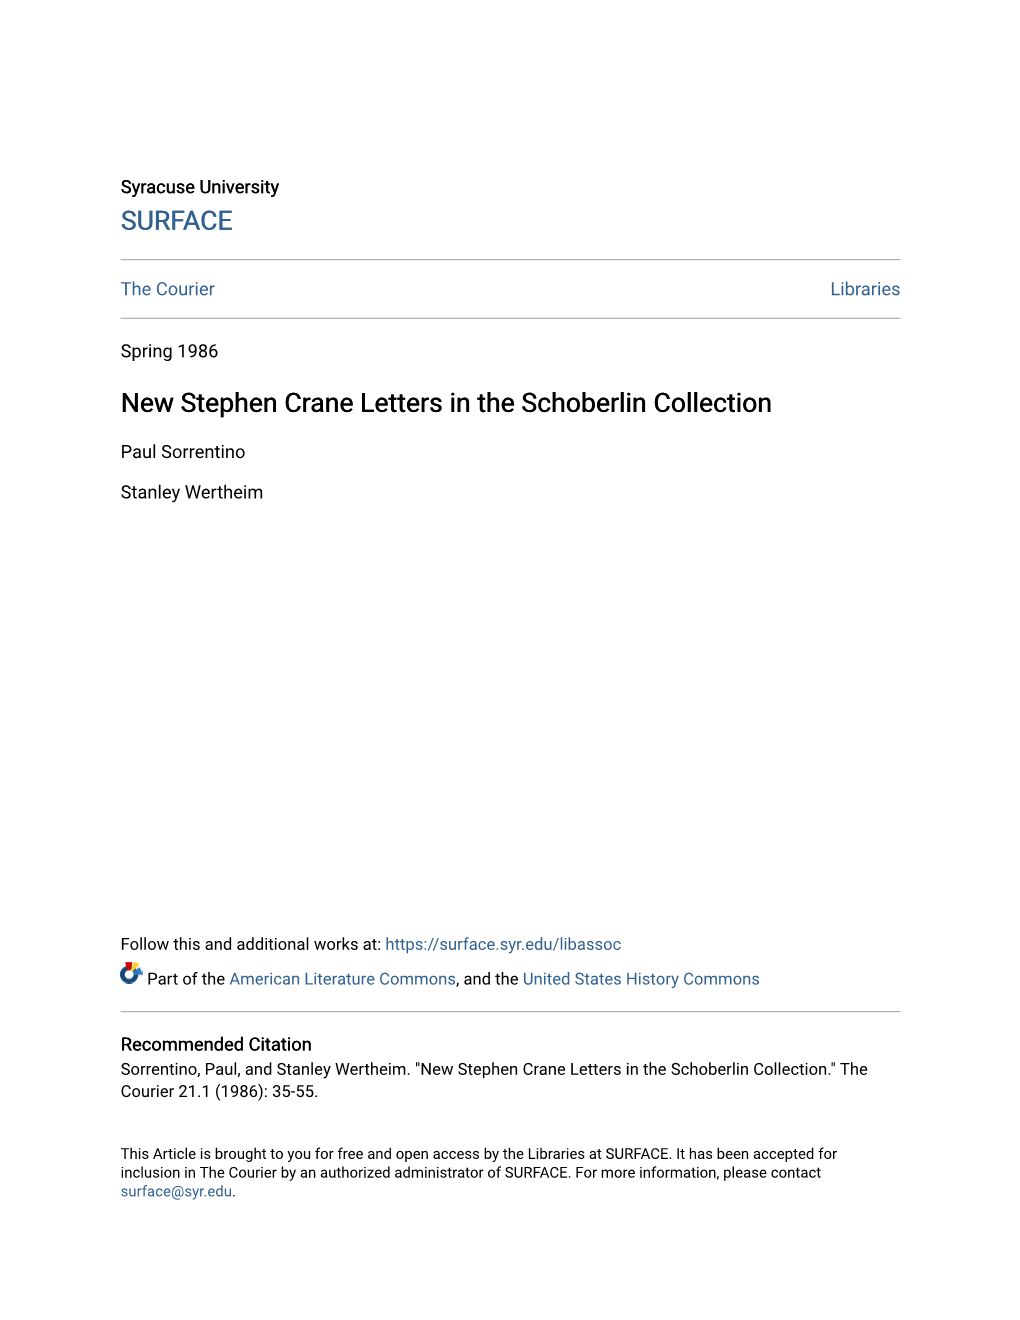 New Stephen Crane Letters in the Schoberlin Collection